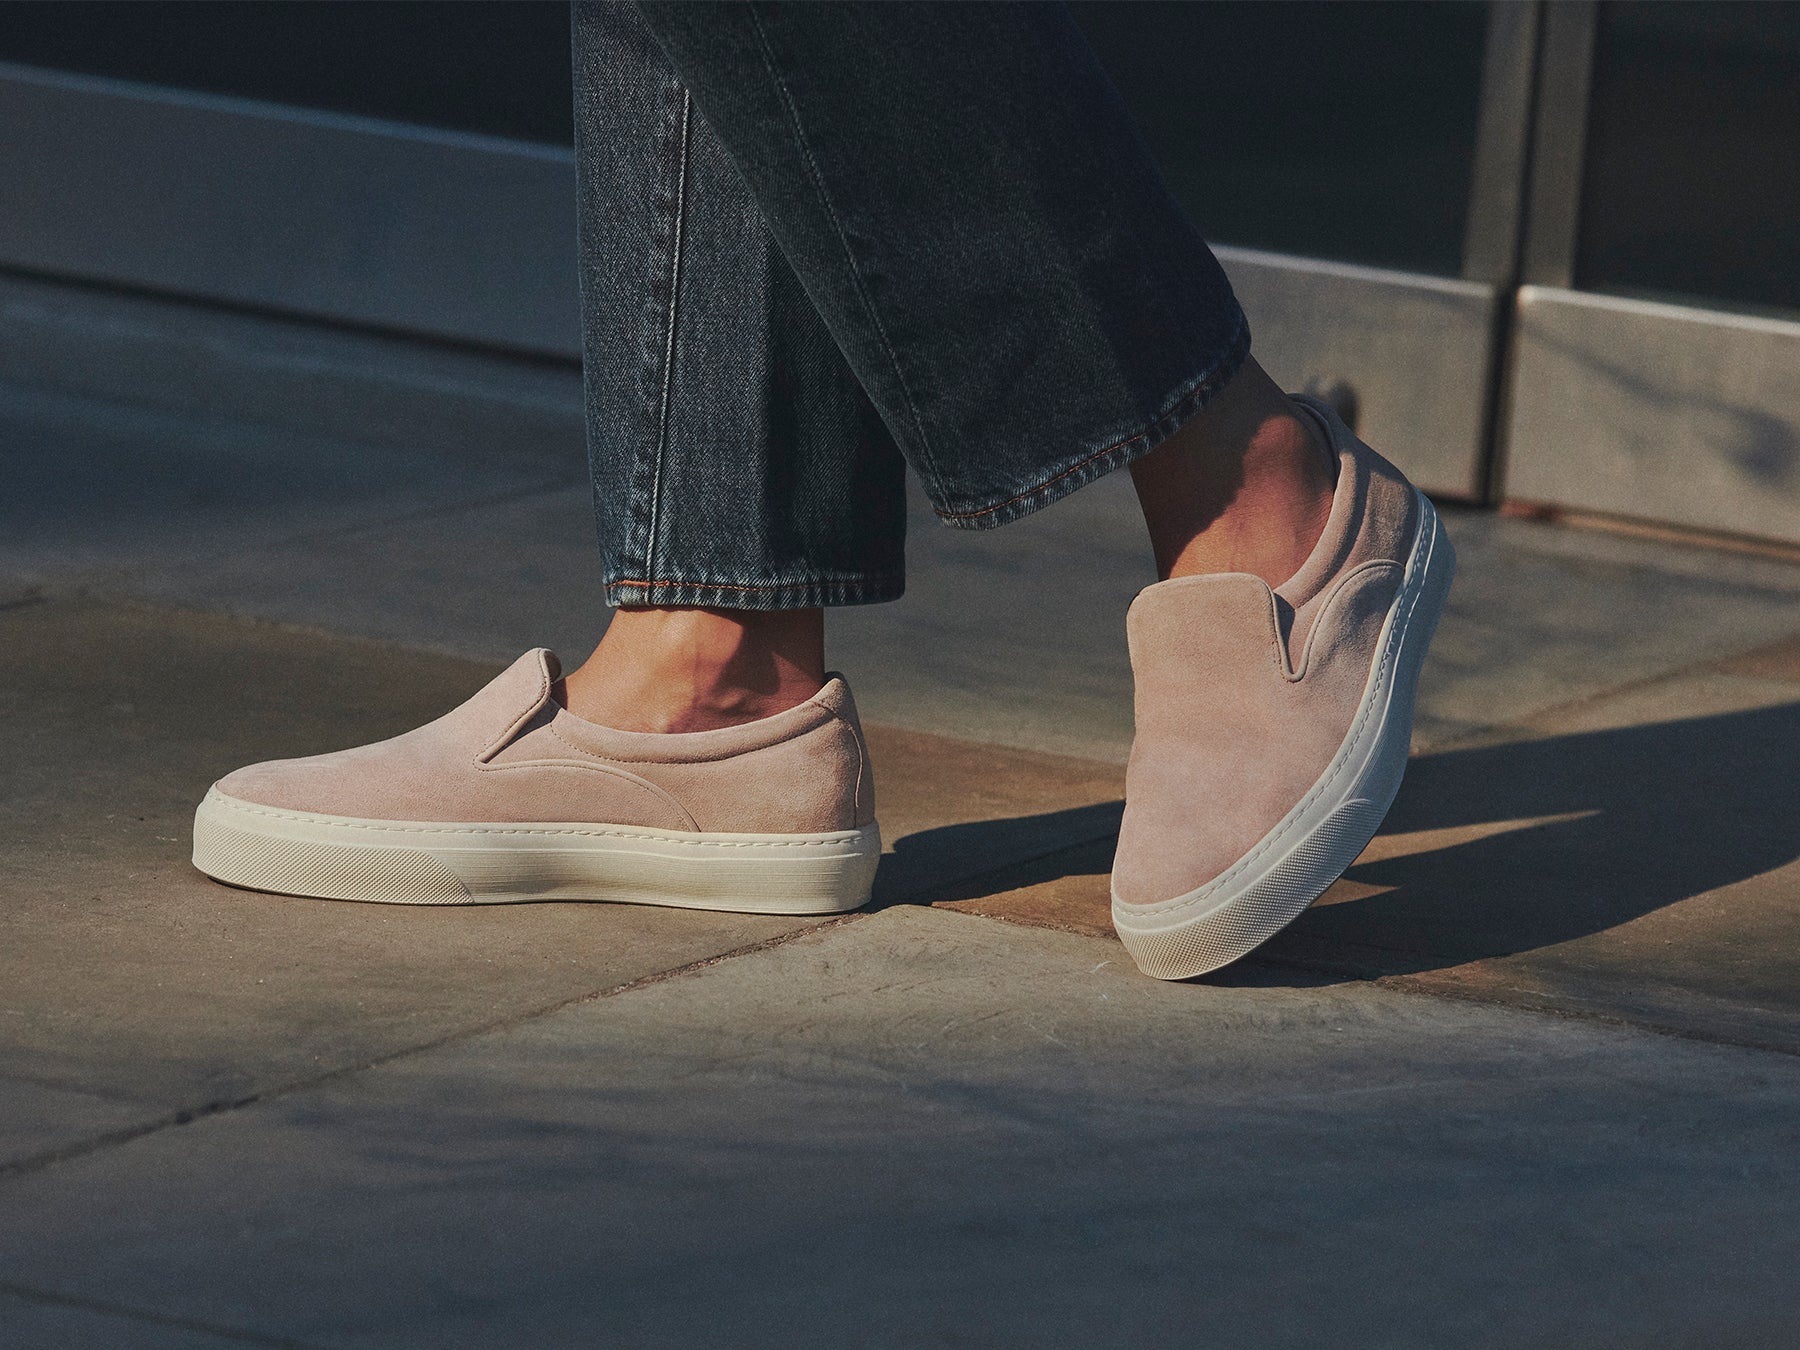 Womens Slip-on Trainers, the BEAT